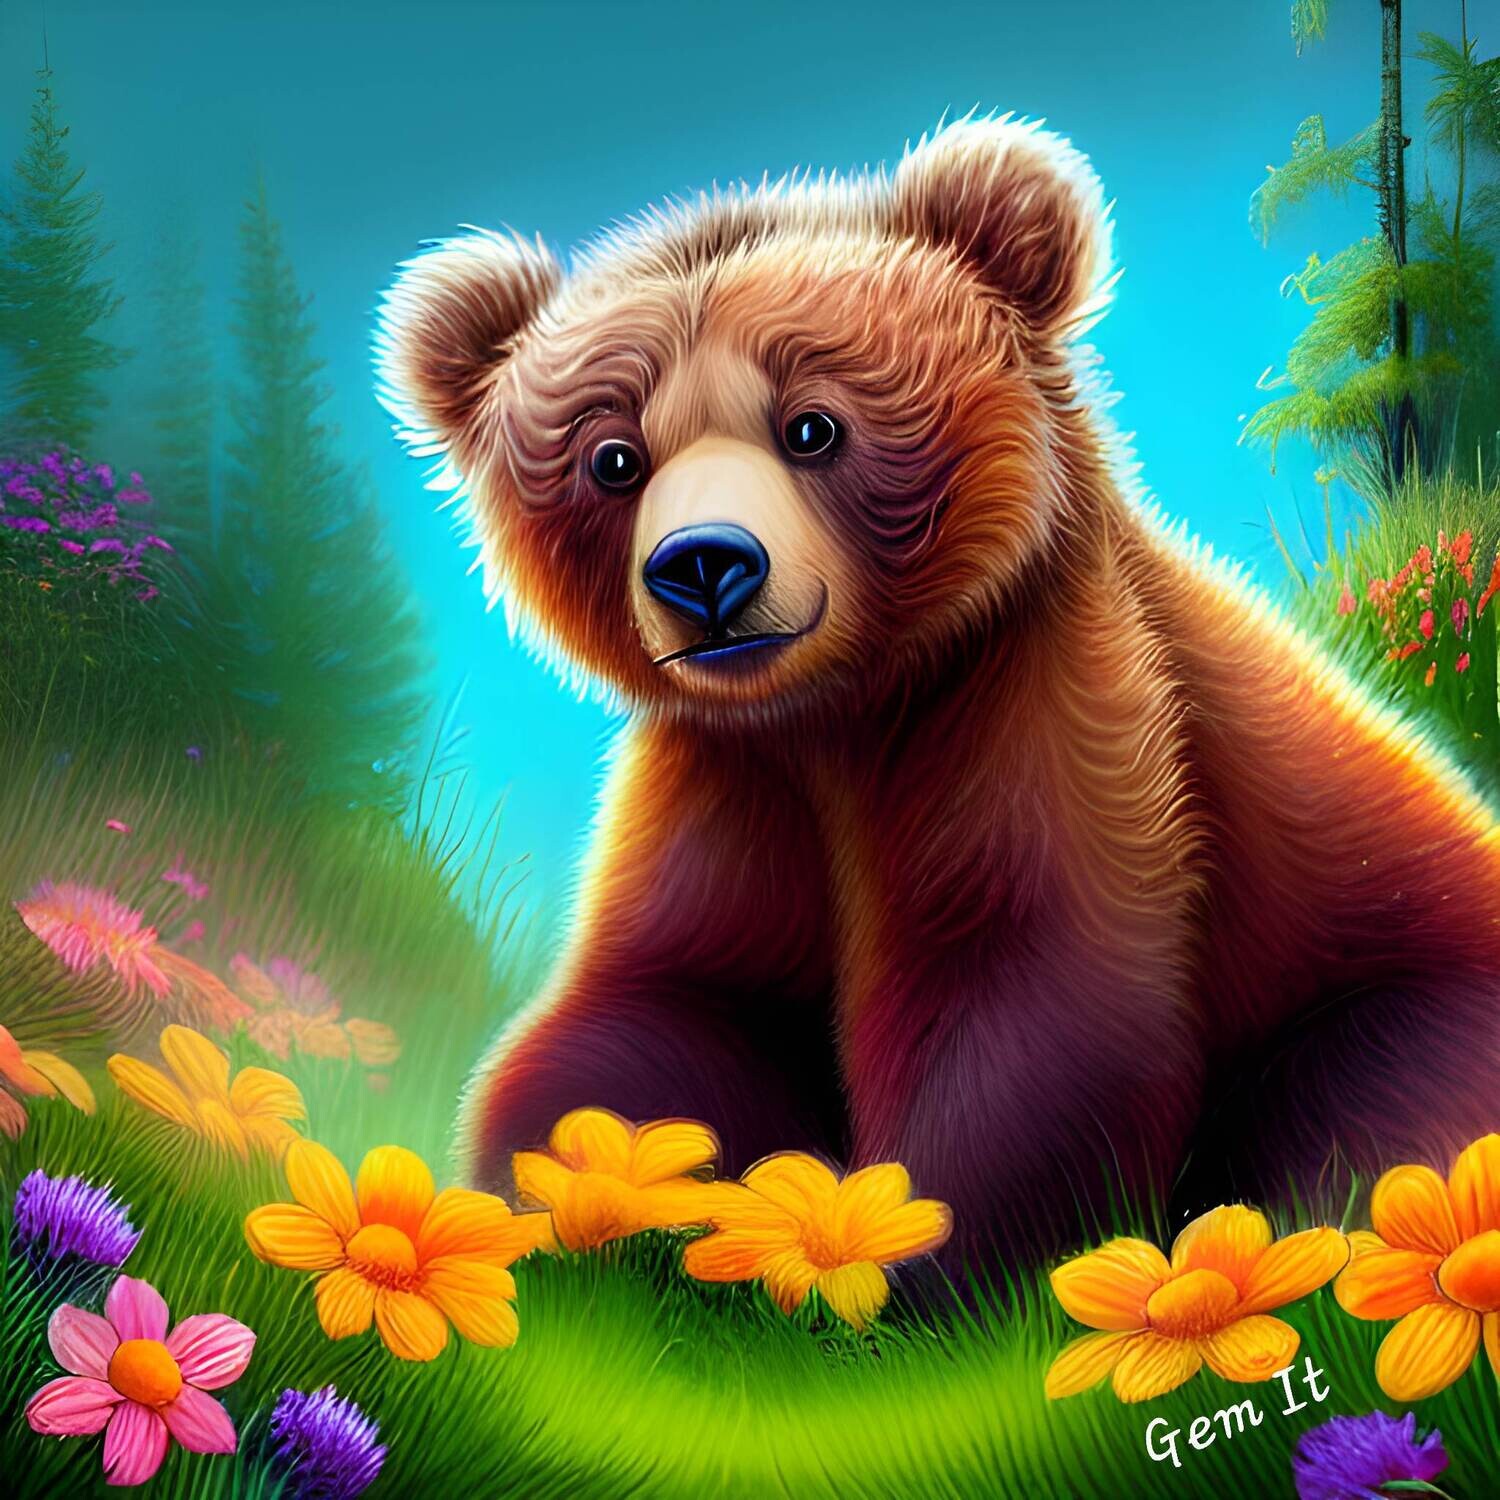 Bear Cub 742 - Full Drill Diamond Painting - Specially ordered for you. Delivery is approximately 4 - 6 weeks.